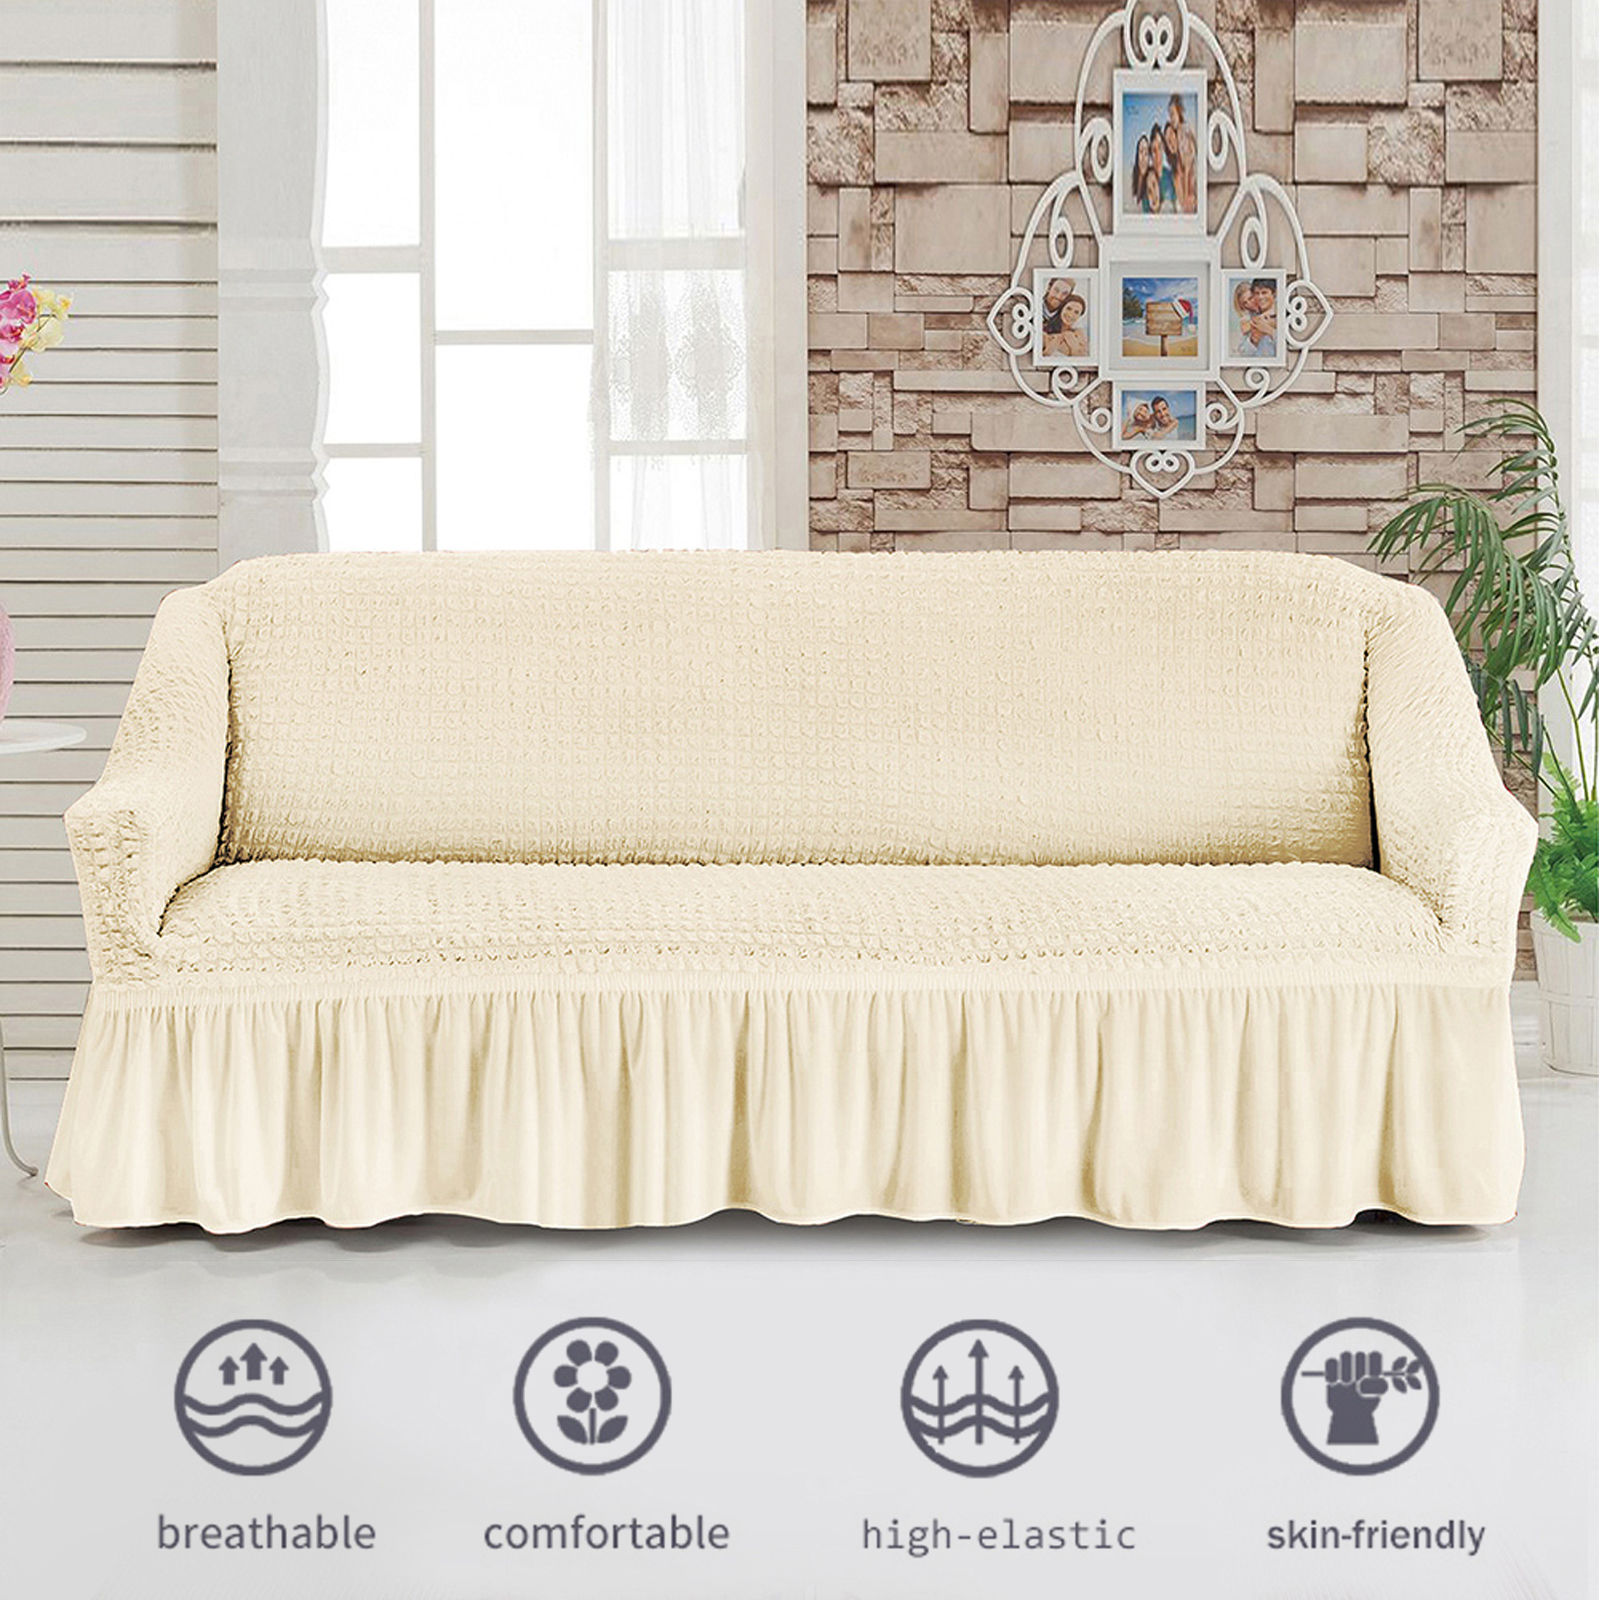 Stretch Sofa Slipcover, 3 Seater Sofa Slipcovers With Skirt With Armless Soft Sofa Cover Elastic Straps Sofa Slipcover For Living Room Kids Pets-white-Large